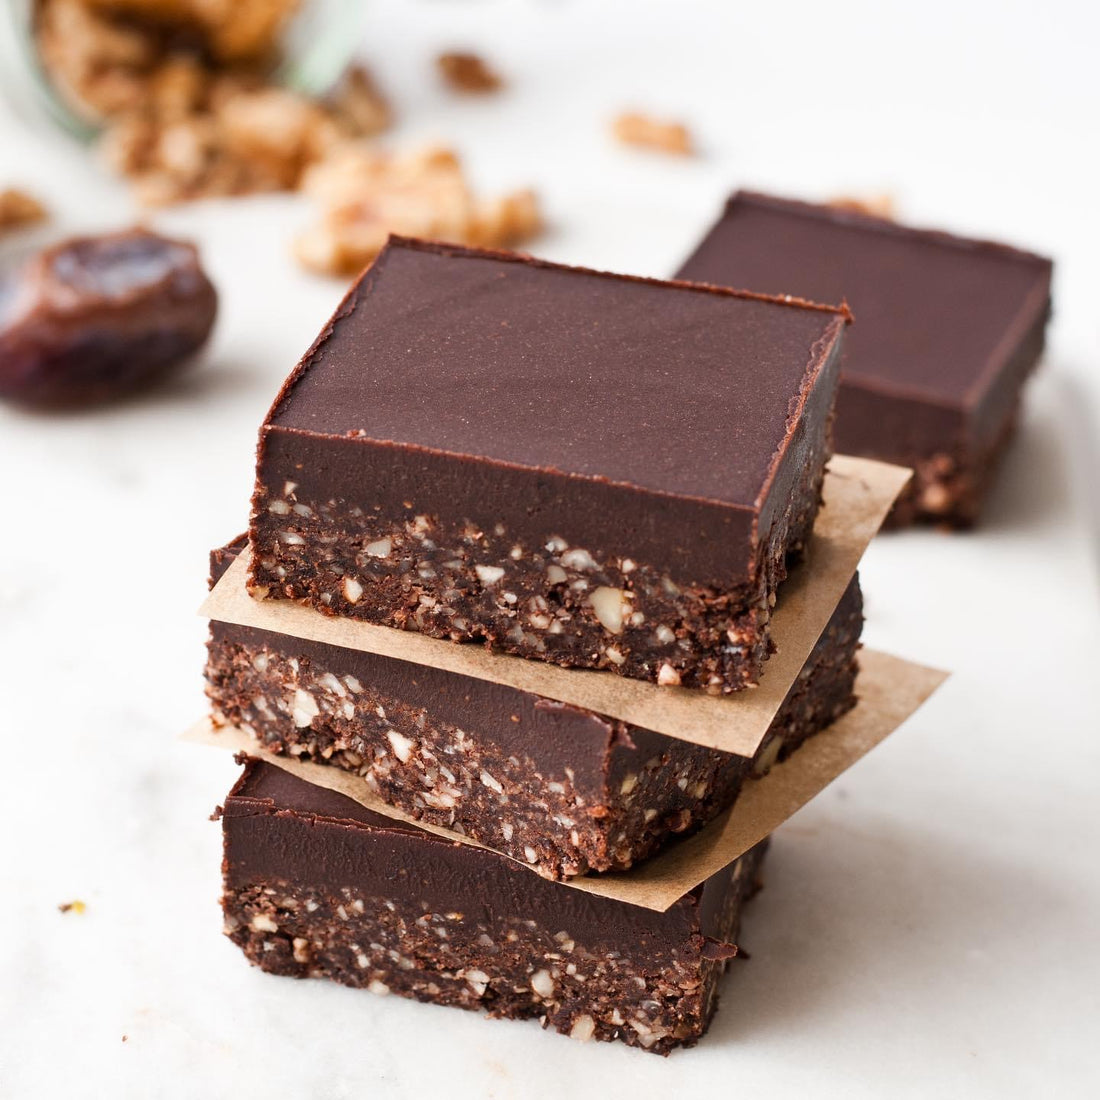 The Ginger Vegan Cookbook: Raw Chocolate Frosted Brownies